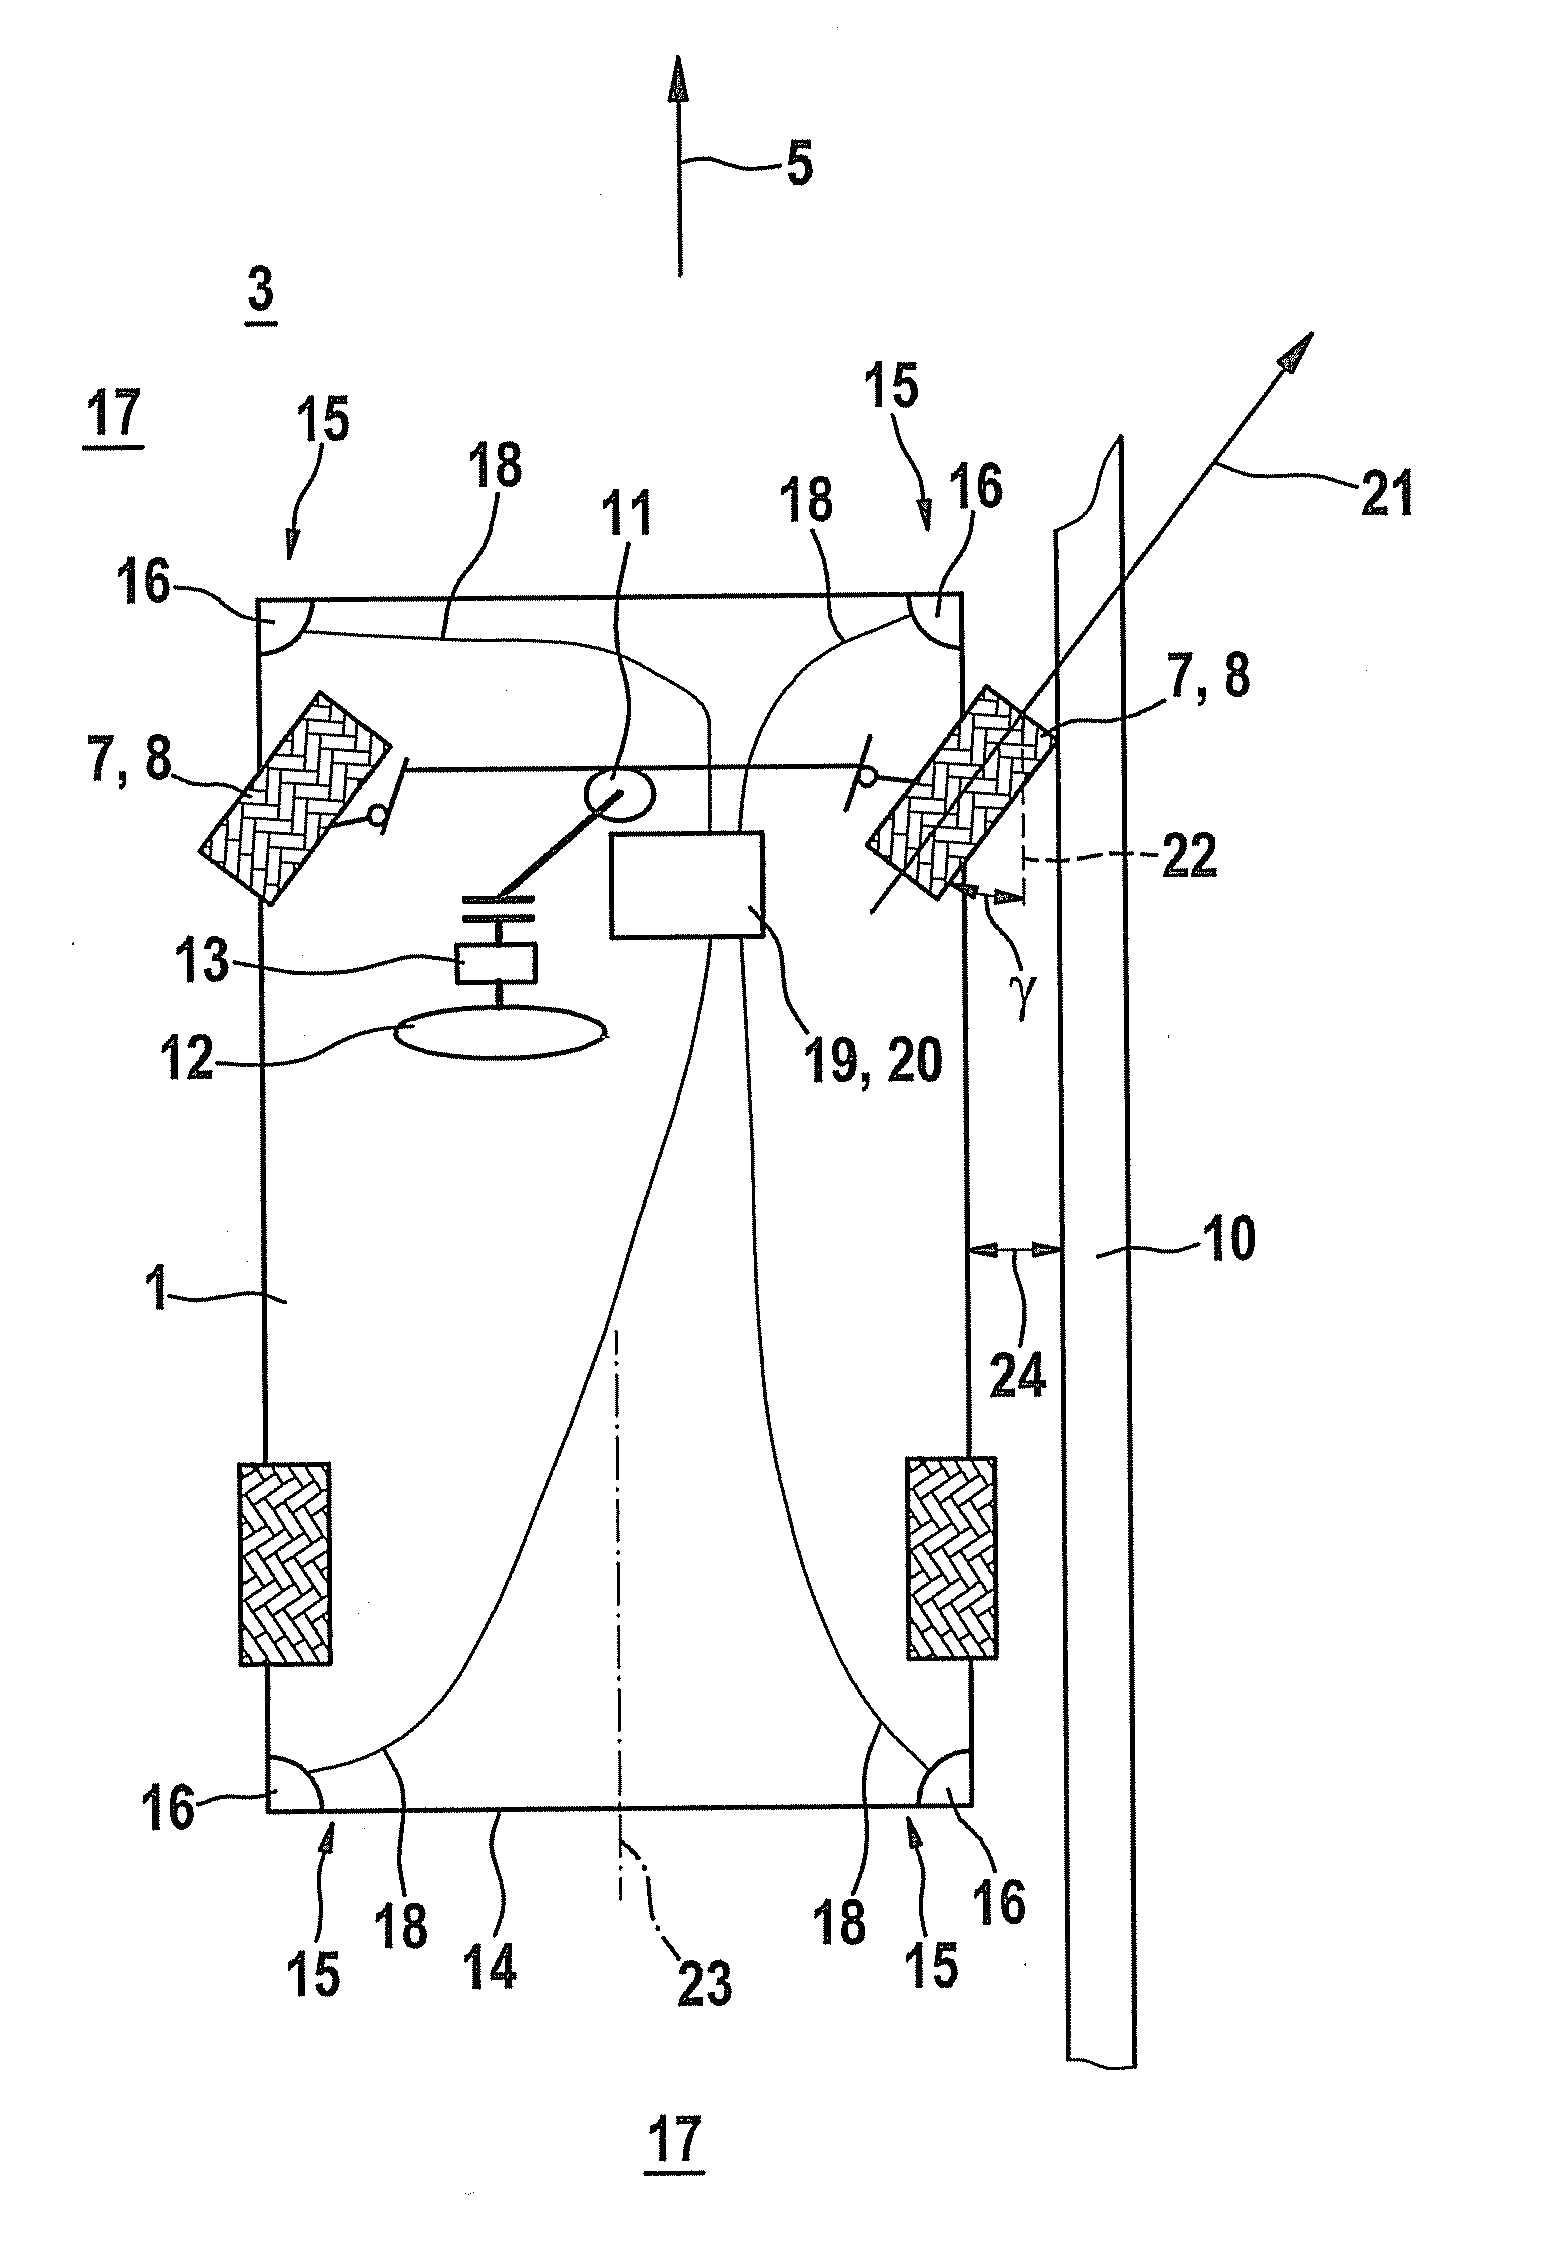 Method and device for parking a motor vehicle